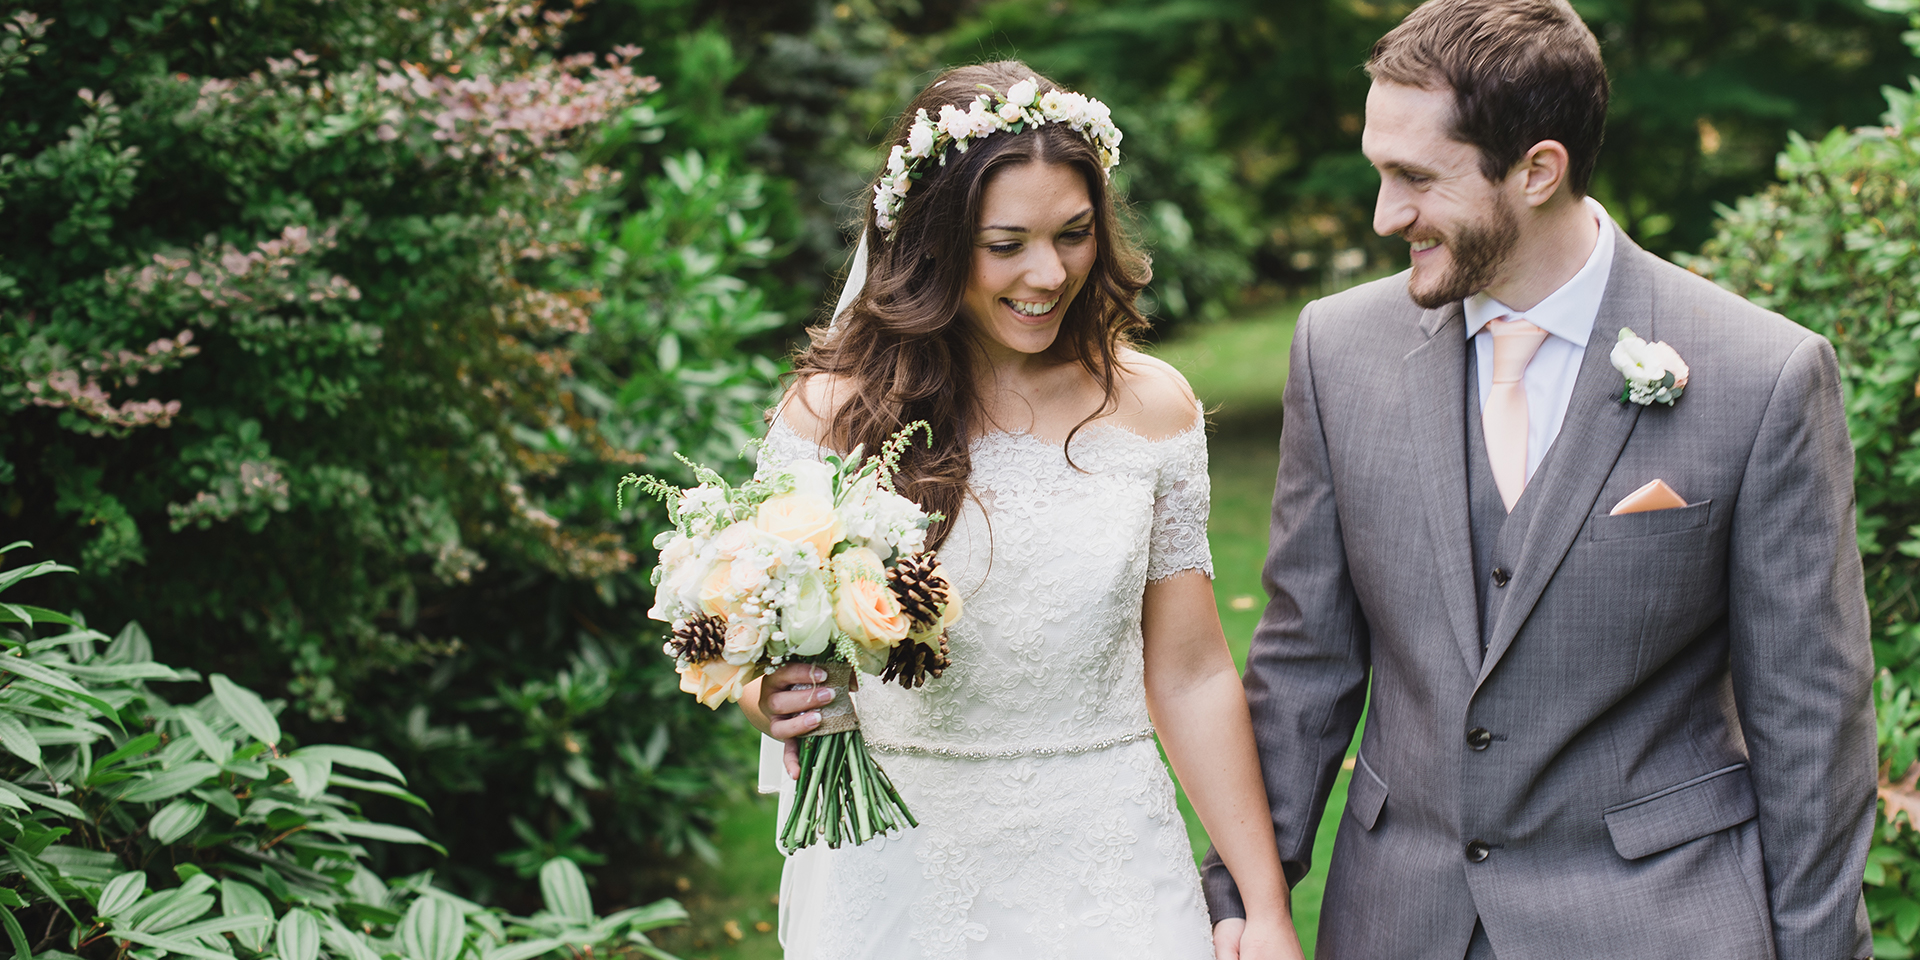 this couple held a swoon worthy wedding day at Rivervale Barns in Hampshire